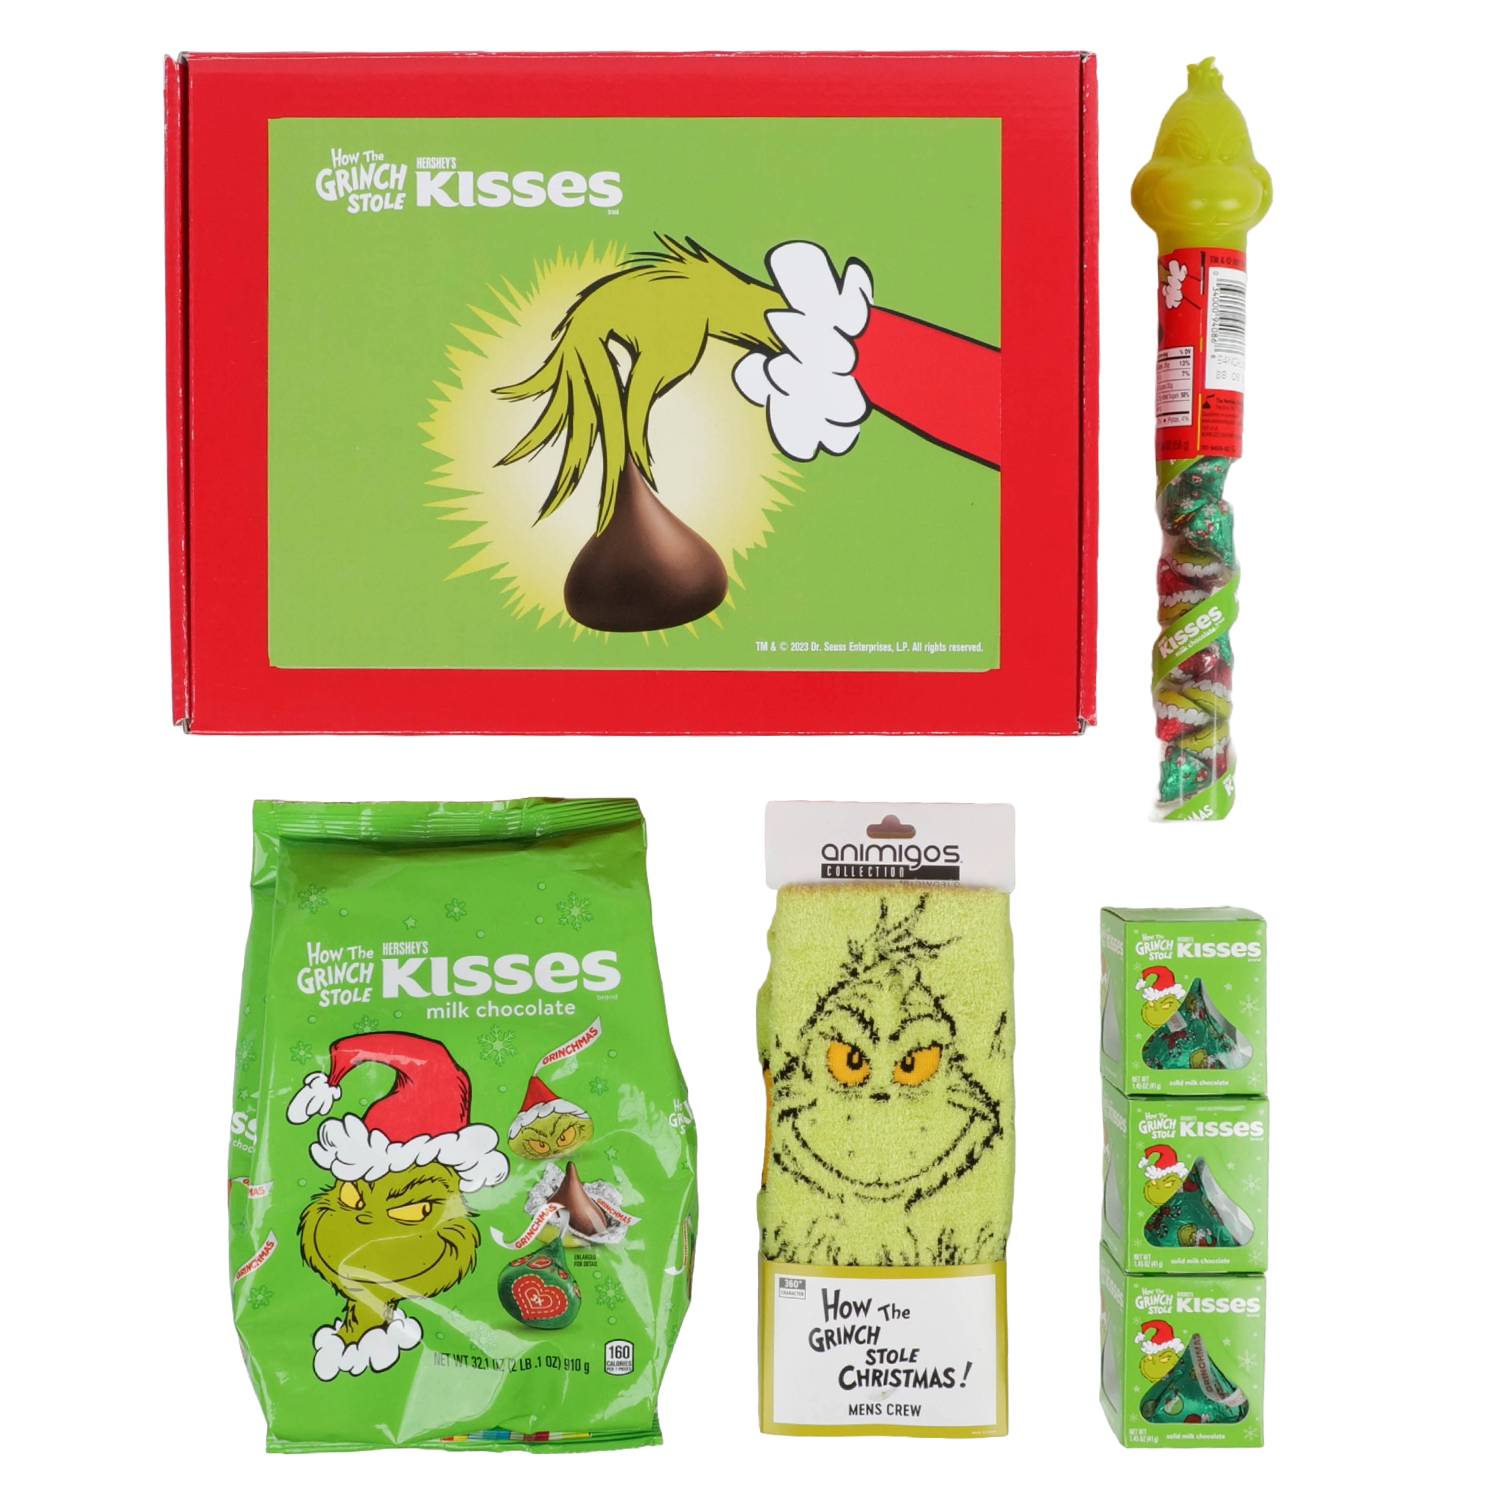 How the Grinch Stole HERSHEY'S KISSES Merry Grinchmas Gift Box with Candy  and Socks